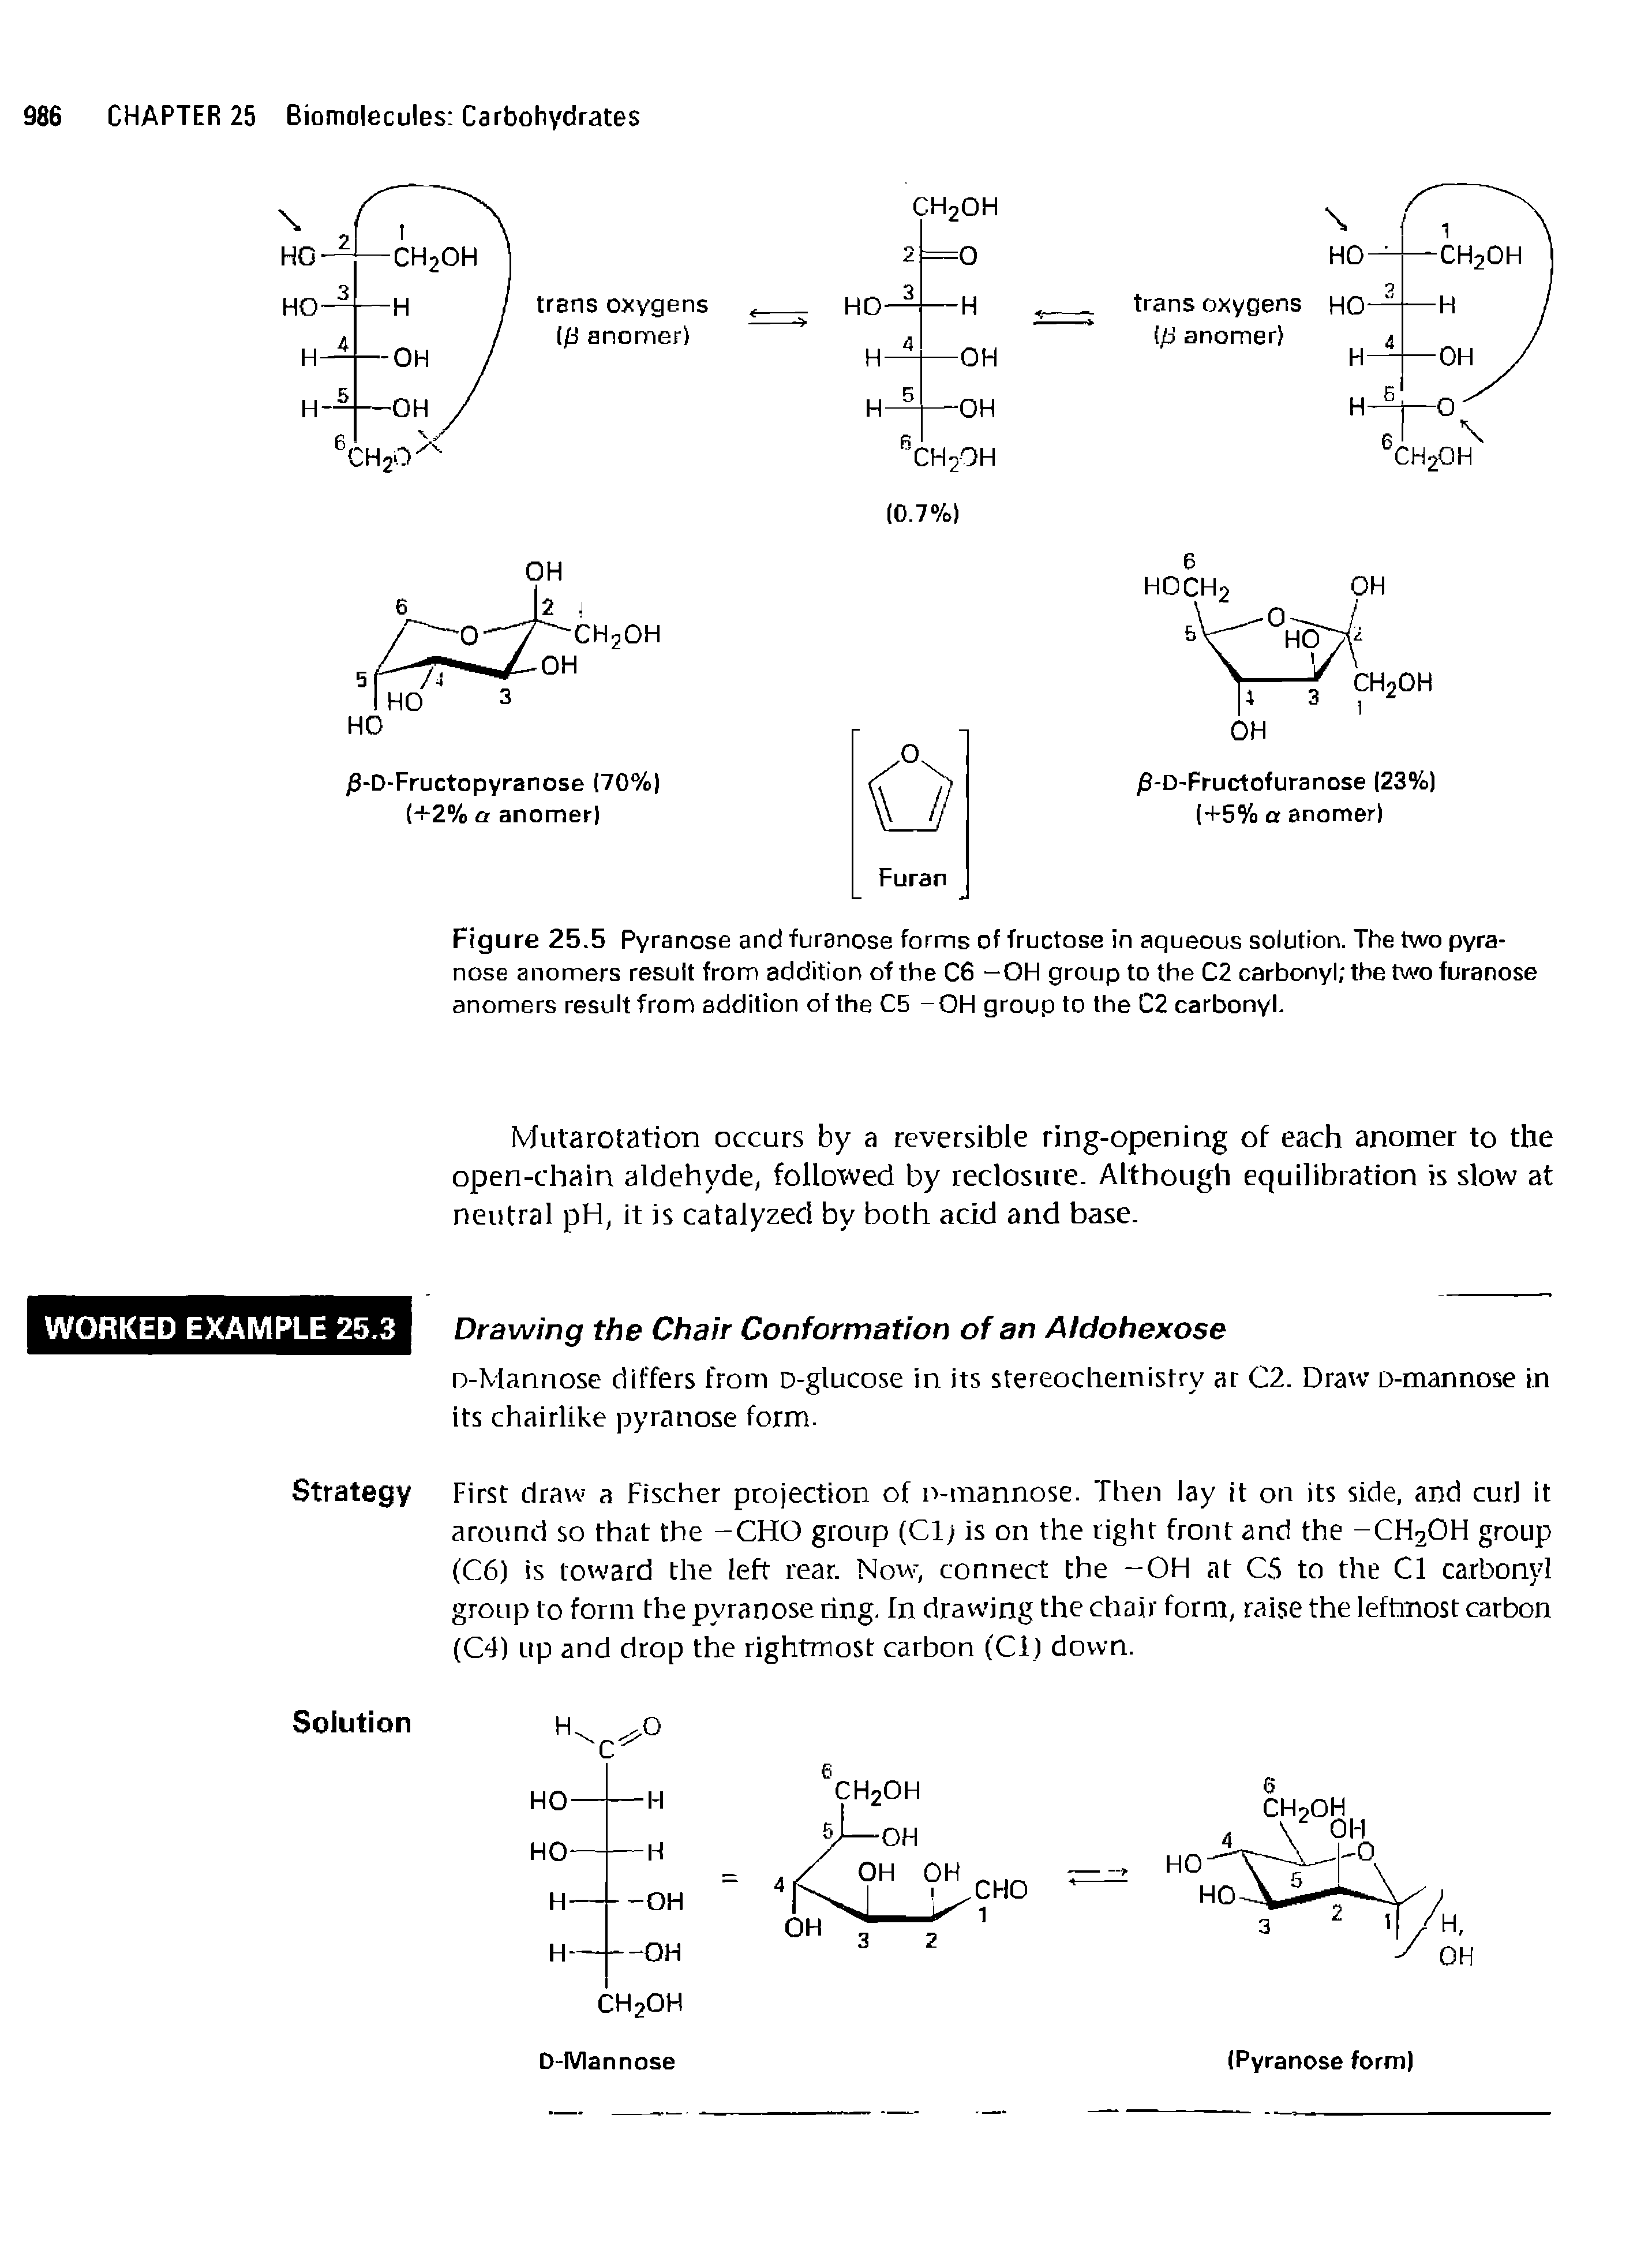 Figure 25.5 Pyranose and furanose forms of fructose in aqueous solution. The two pyra-nose anomers result from addition of the C6 -OH group to the C2 carbonyl the two furanose anomers result from addition of the C5 -OH group to the C2 carbonyl.